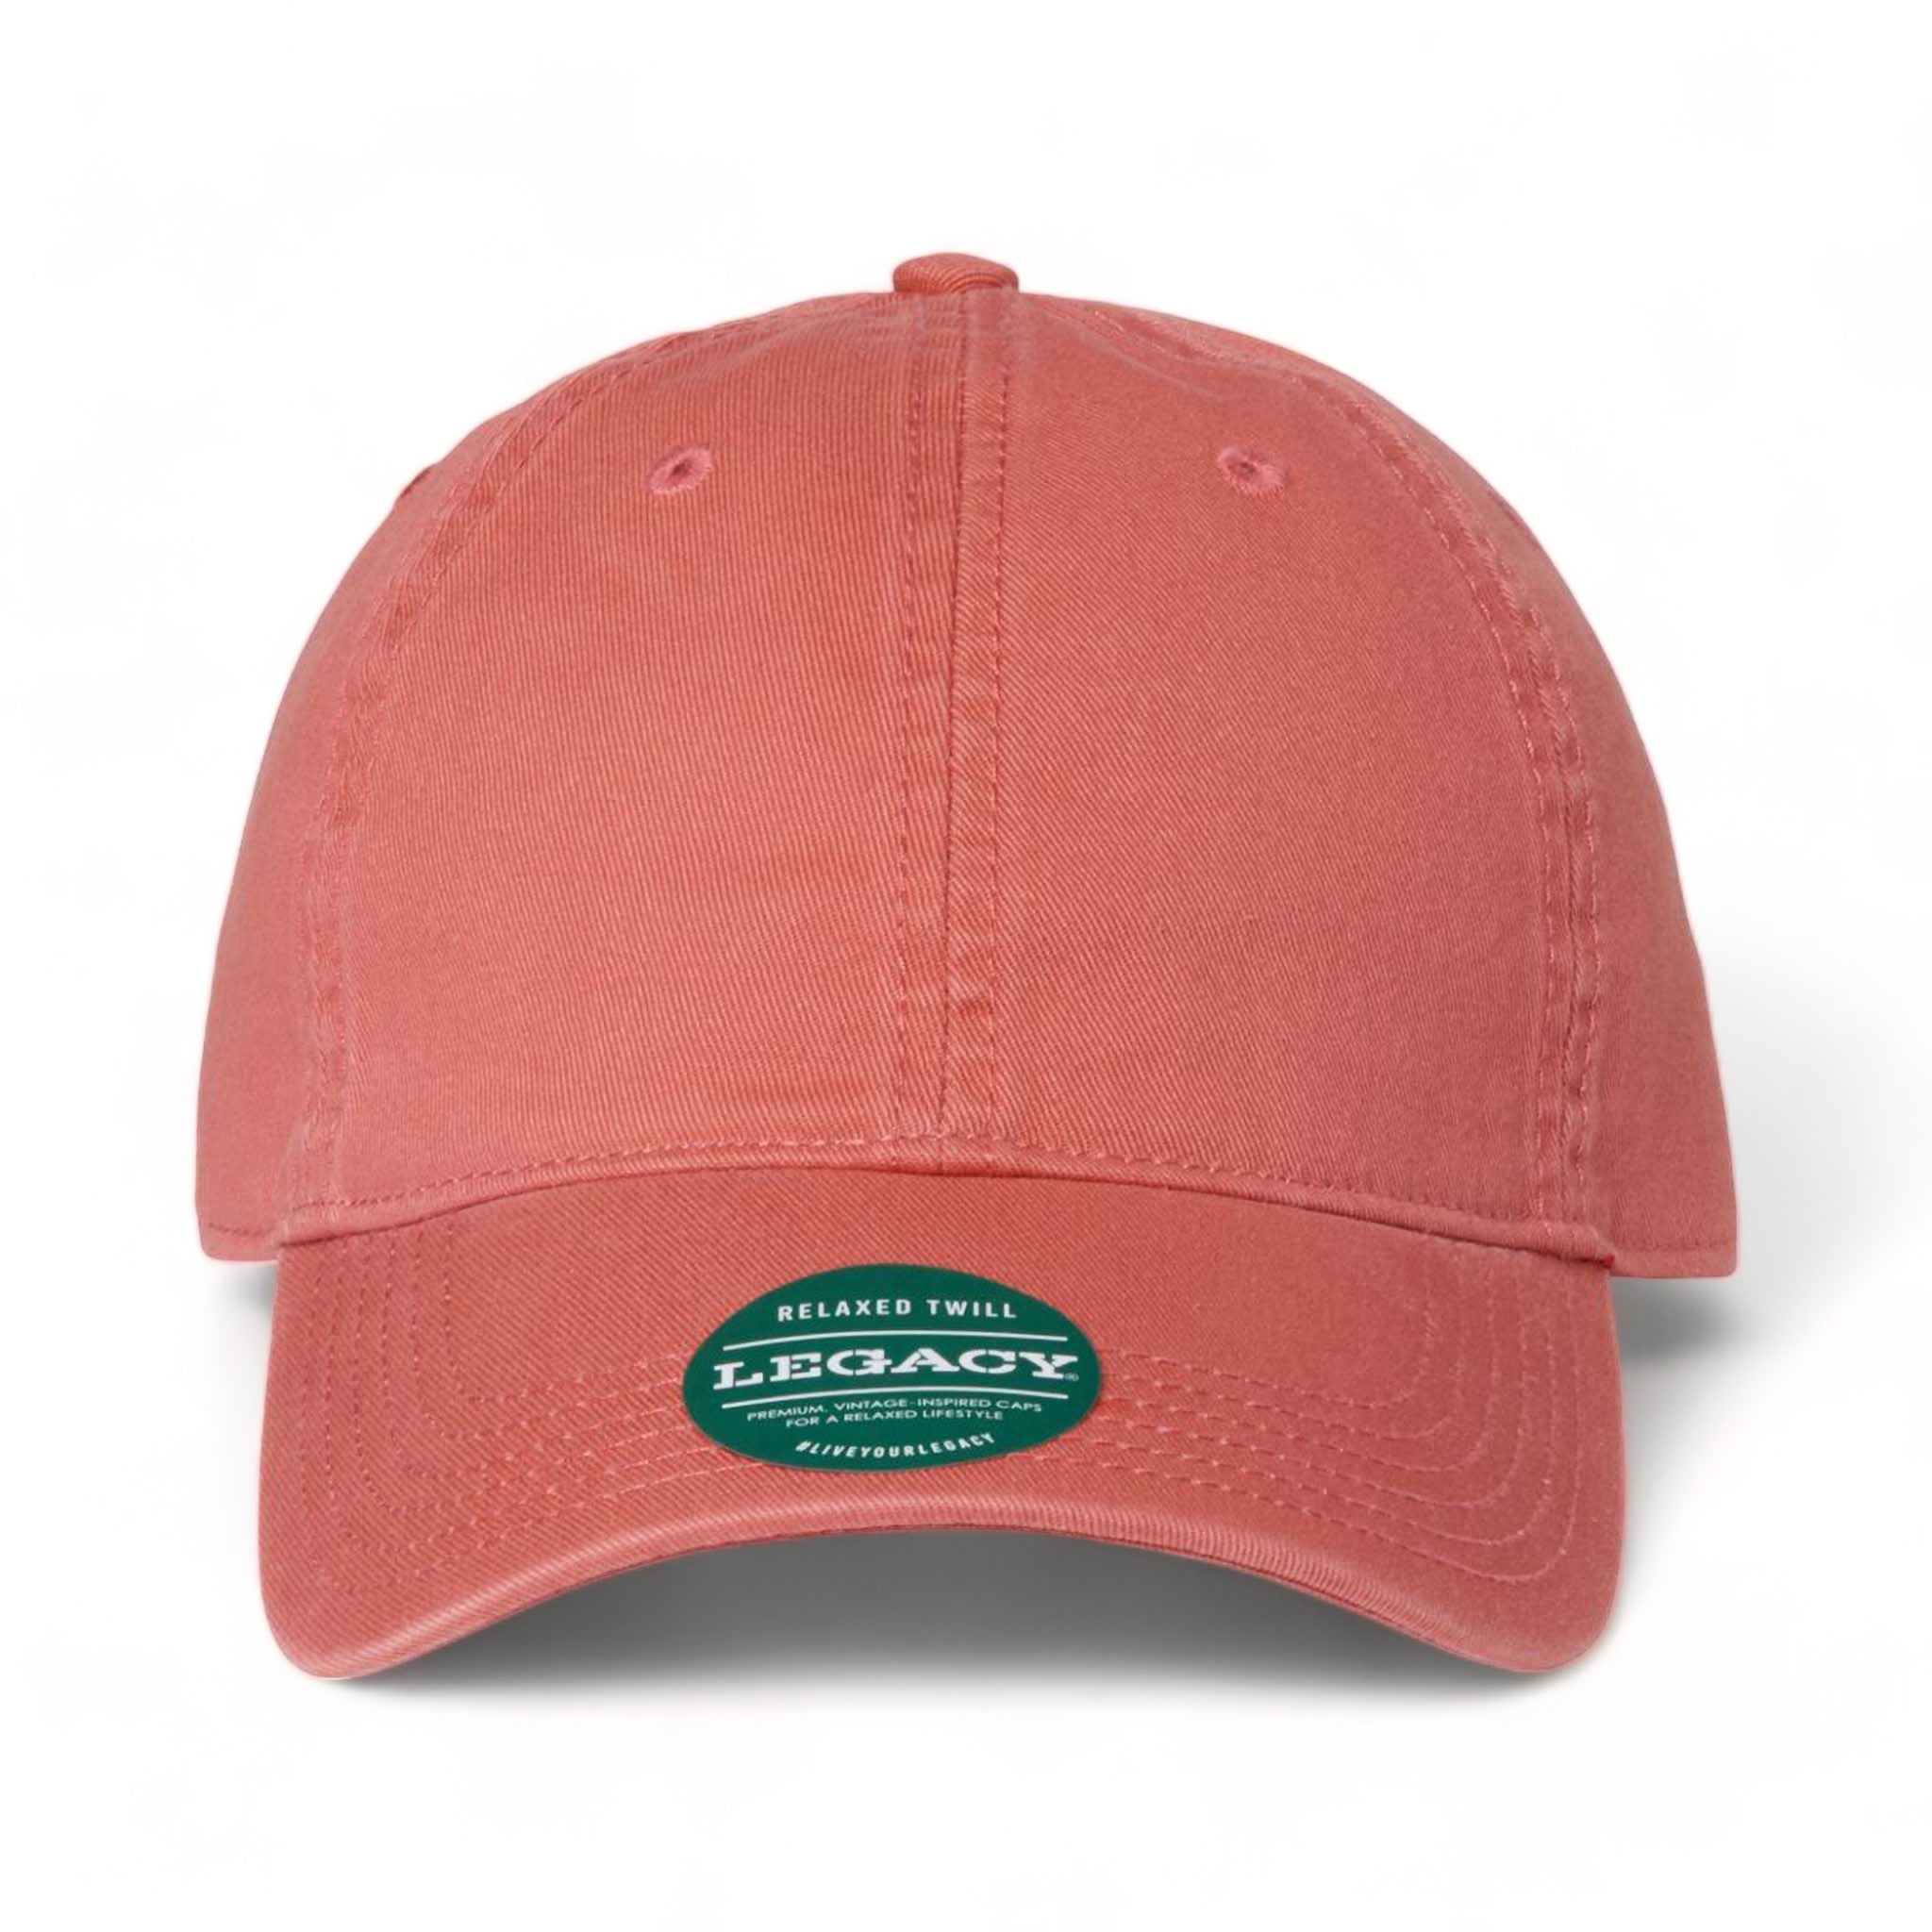 Front view of LEGACY EZA custom hat in nantucket red